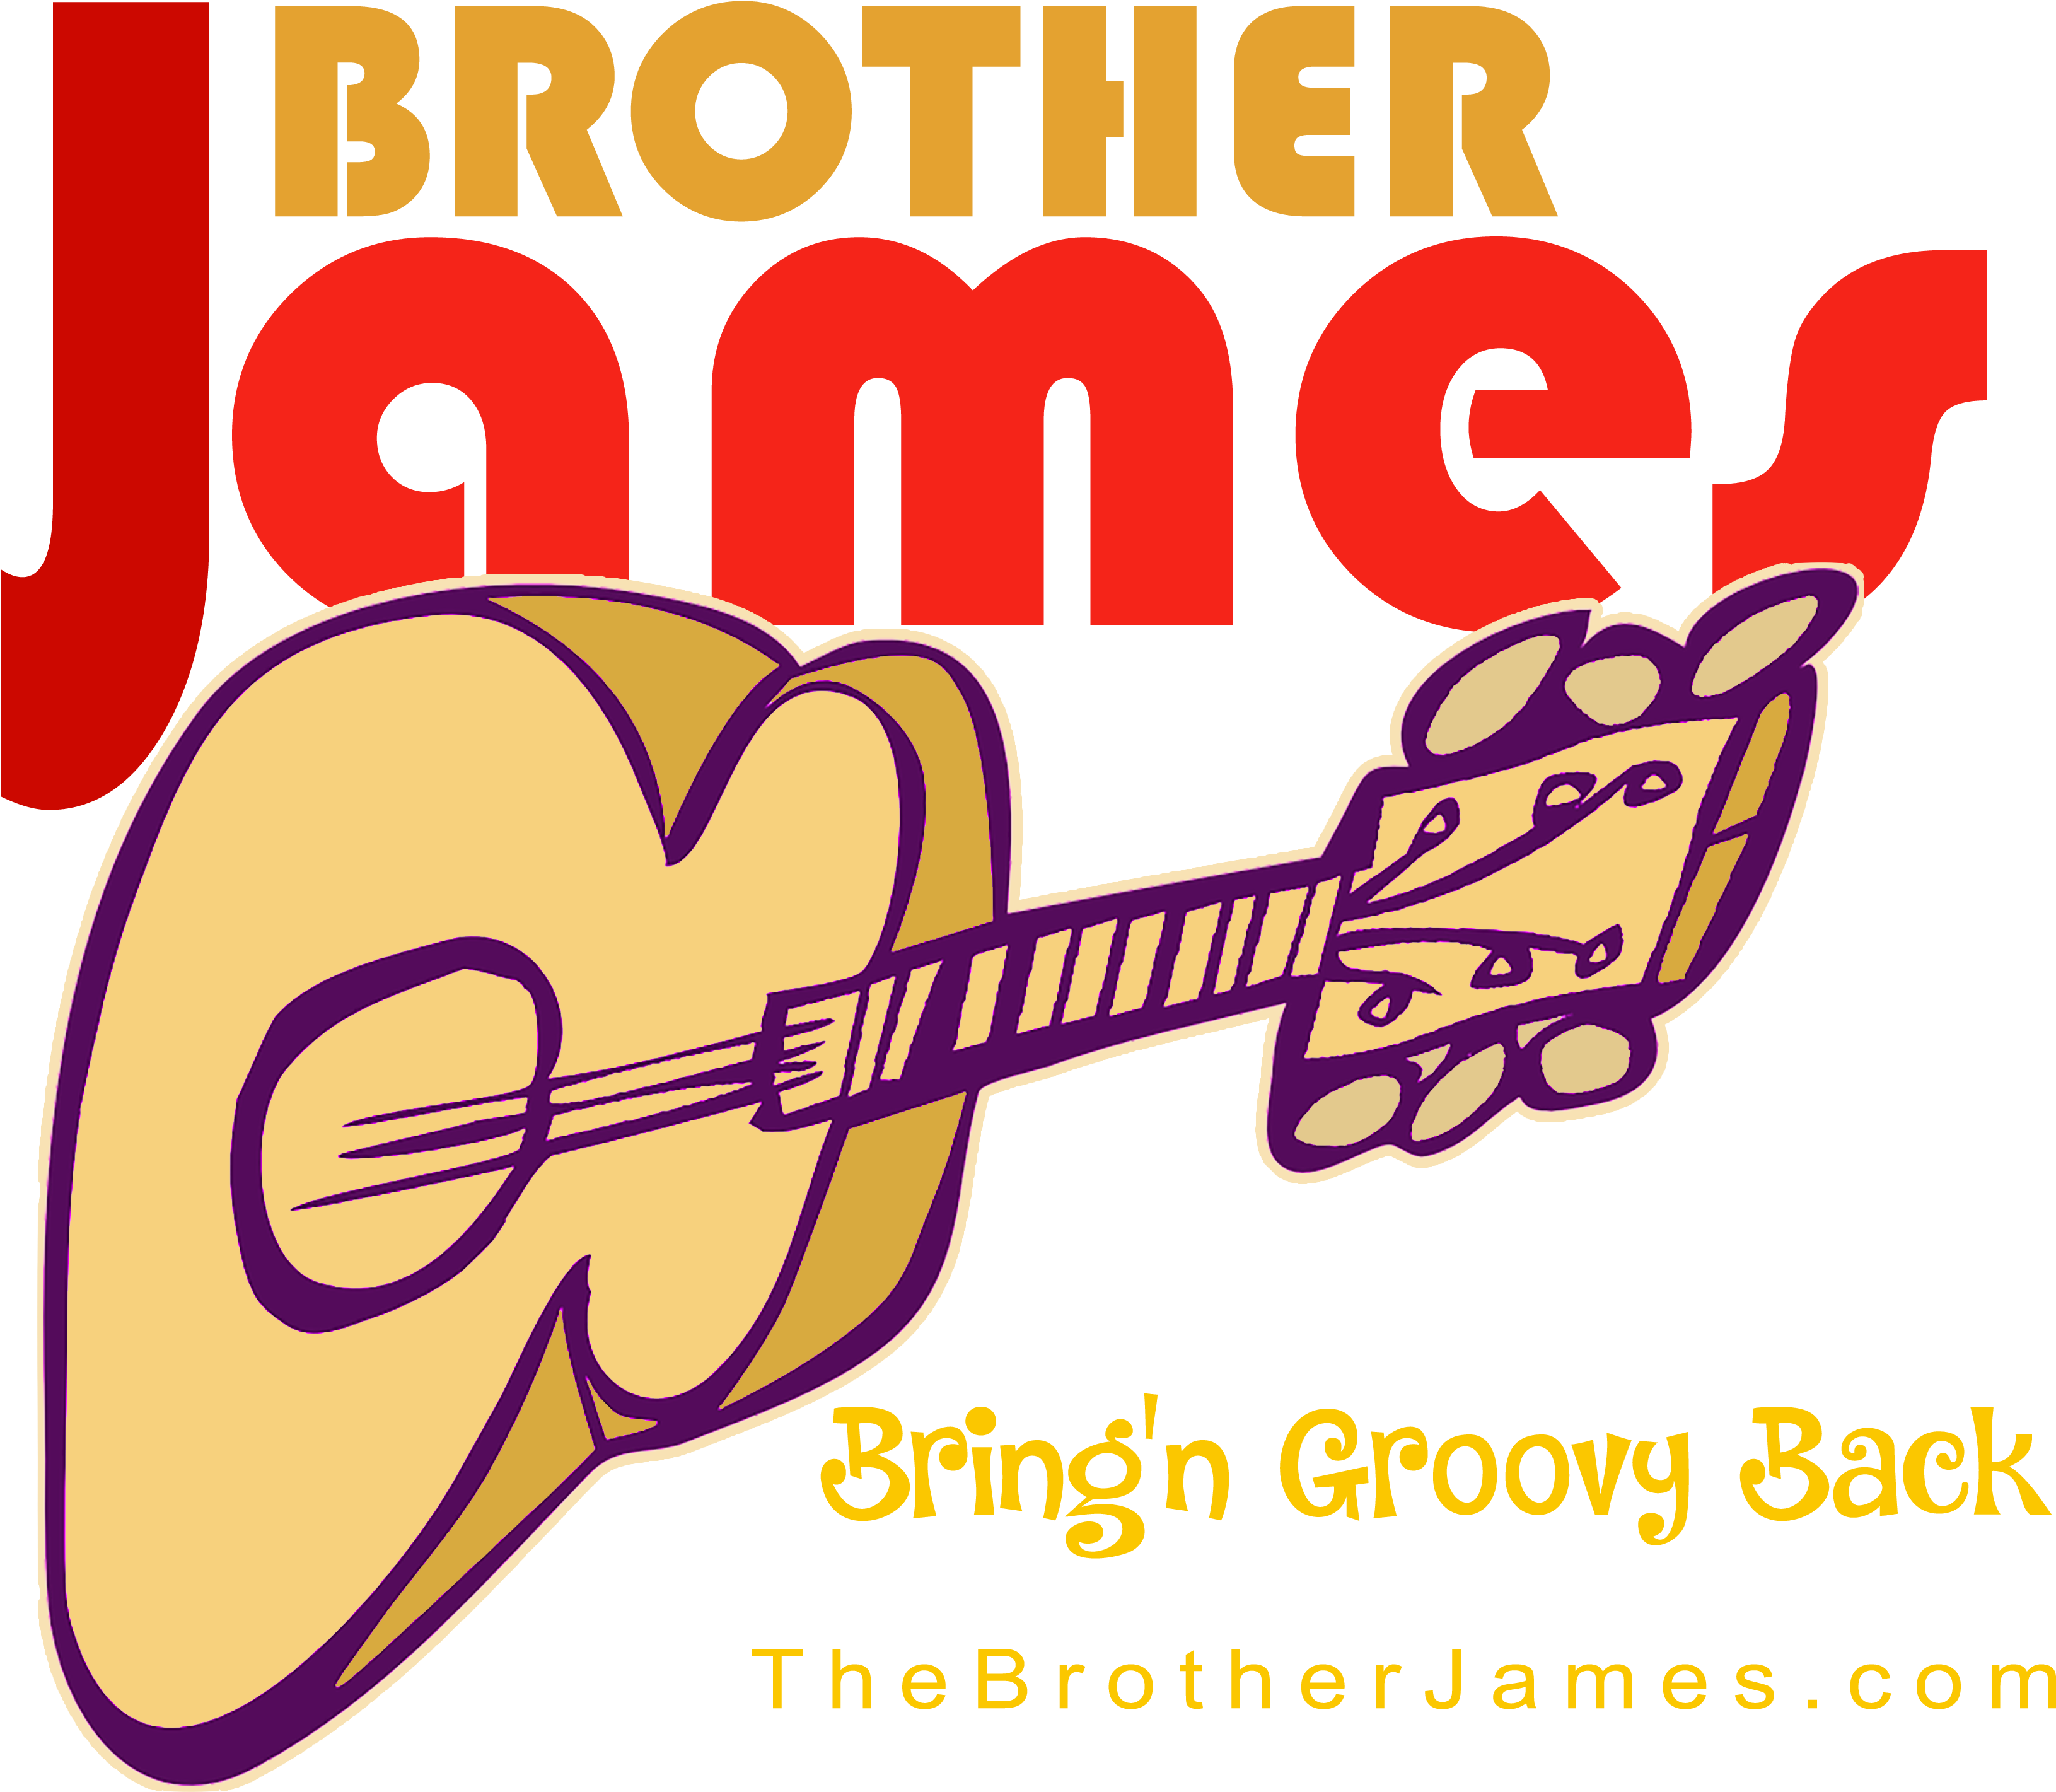 Brother James Is An Experienced Singer Guitarist Available - Poster (3600x3000)